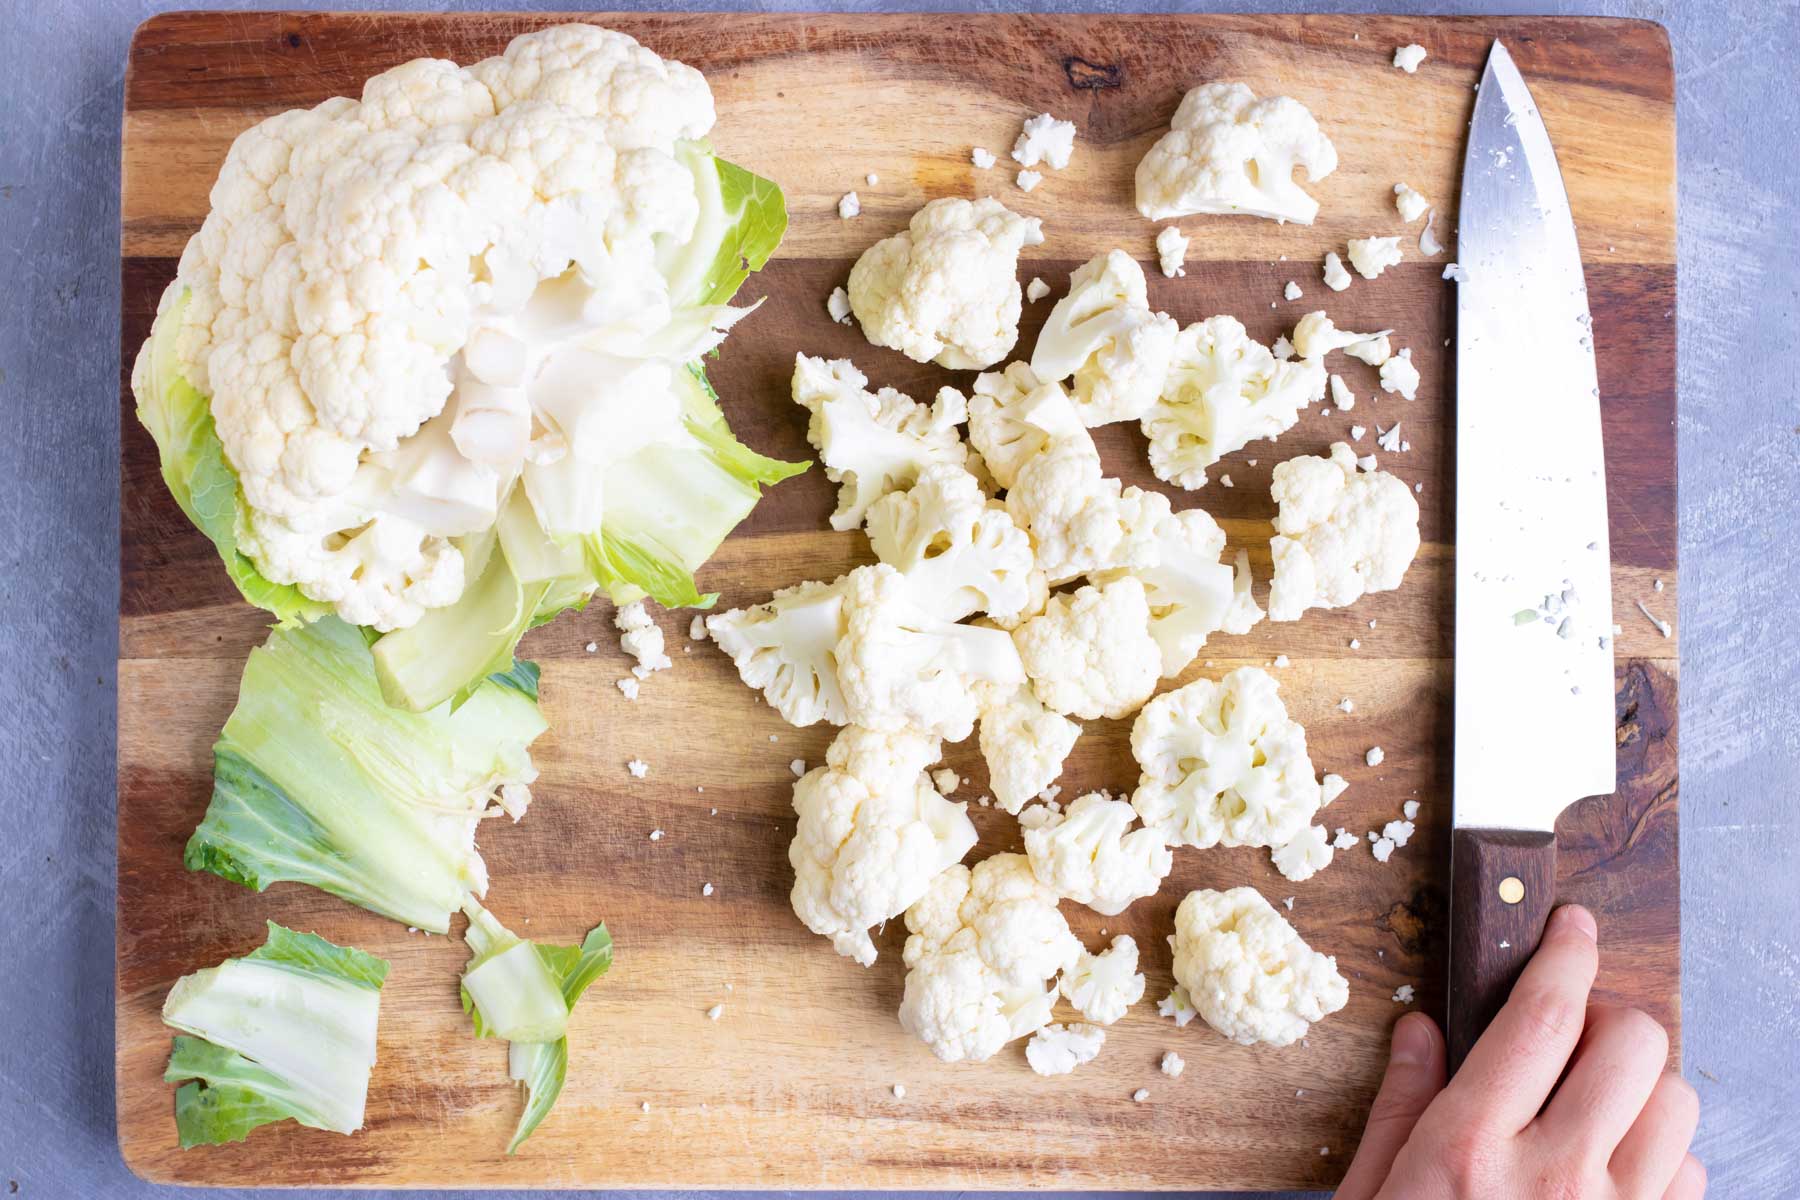 A head of cauliflower that is being cut into florets on a wooden cutting board.